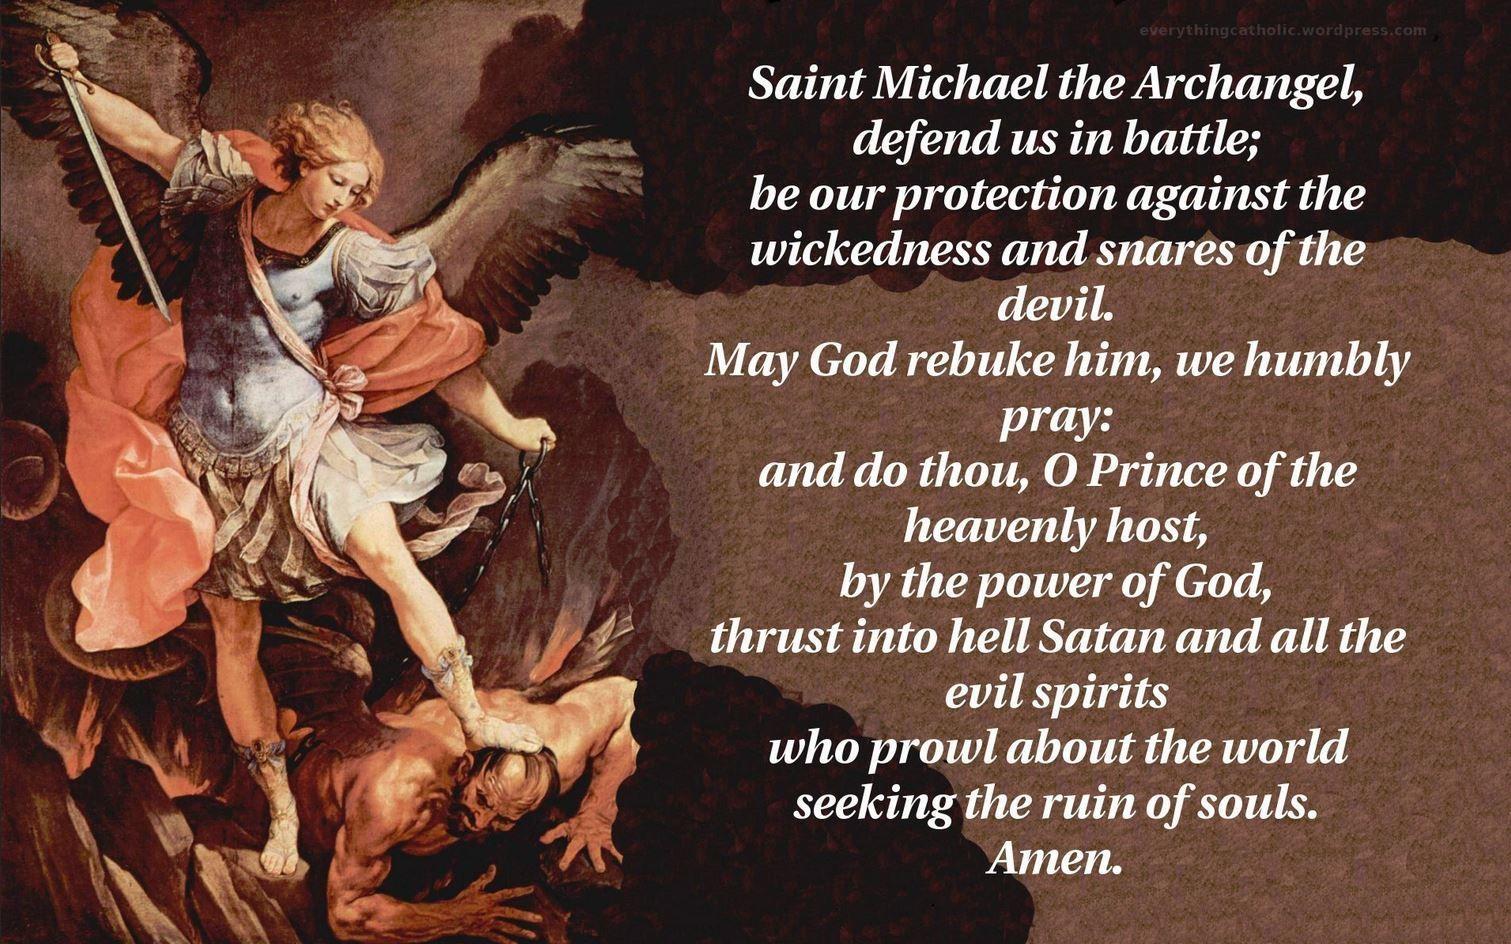 September 29: Dedication to St. Michael the Archangel, Protector